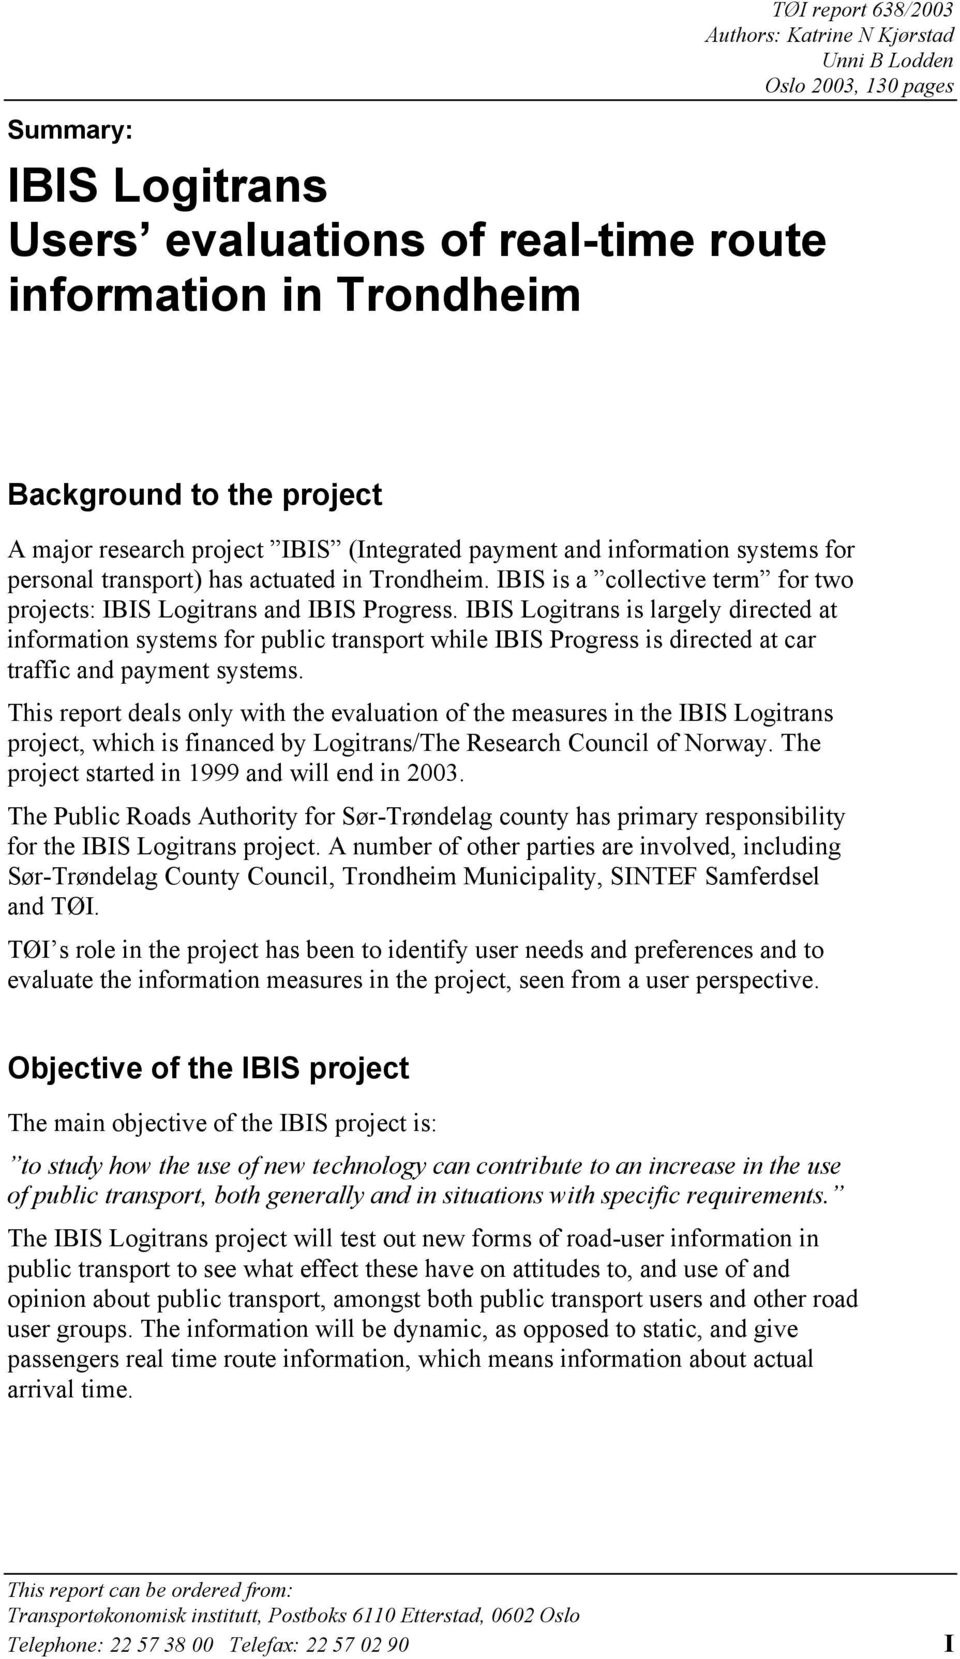 IBIS Logitrans is largely directed at information systems for public transport while IBIS Progress is directed at car traffic and payment systems.